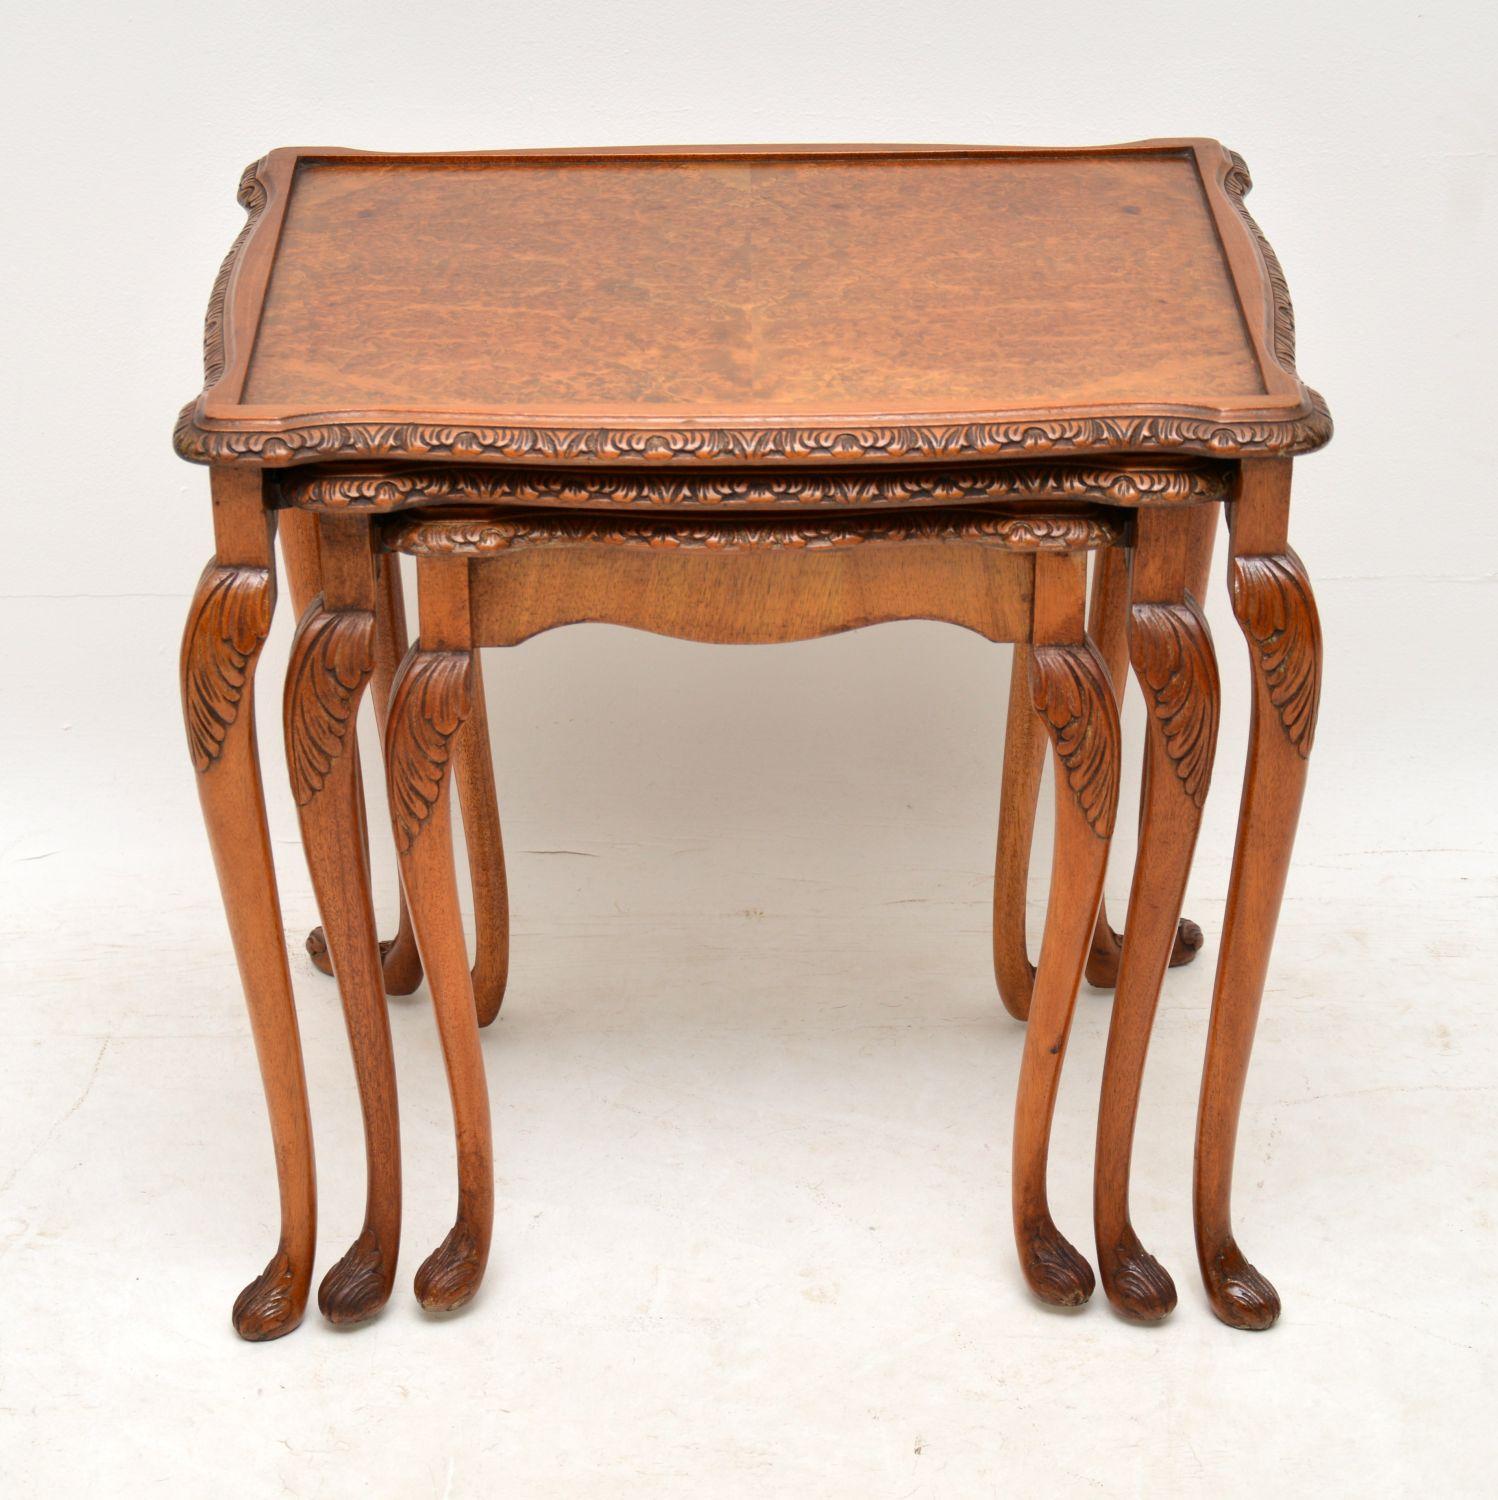 Antique Queen Anne style walnut nest of tables dating from circa 1930s period and in good original condition, having just been French polished. They have burr walnut table tops, carved shaped edges and more carving on the solid walnut